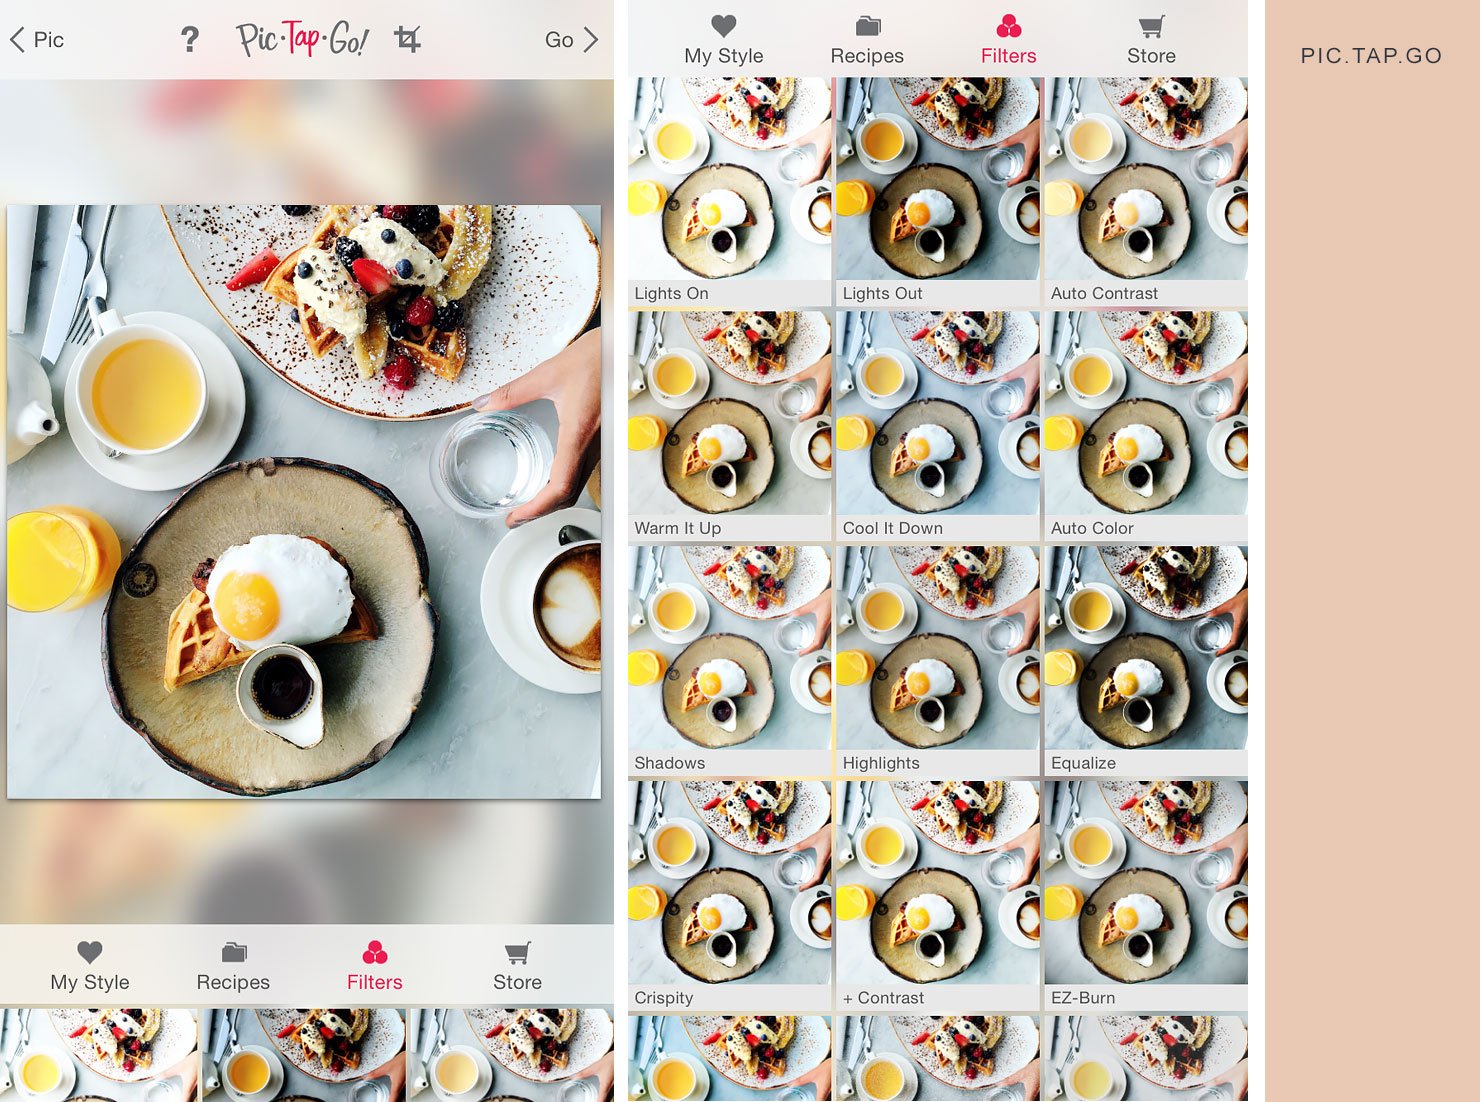 5 Steps and 5 Apps for better Instagram photos - Editing app Pic.Tap.Go